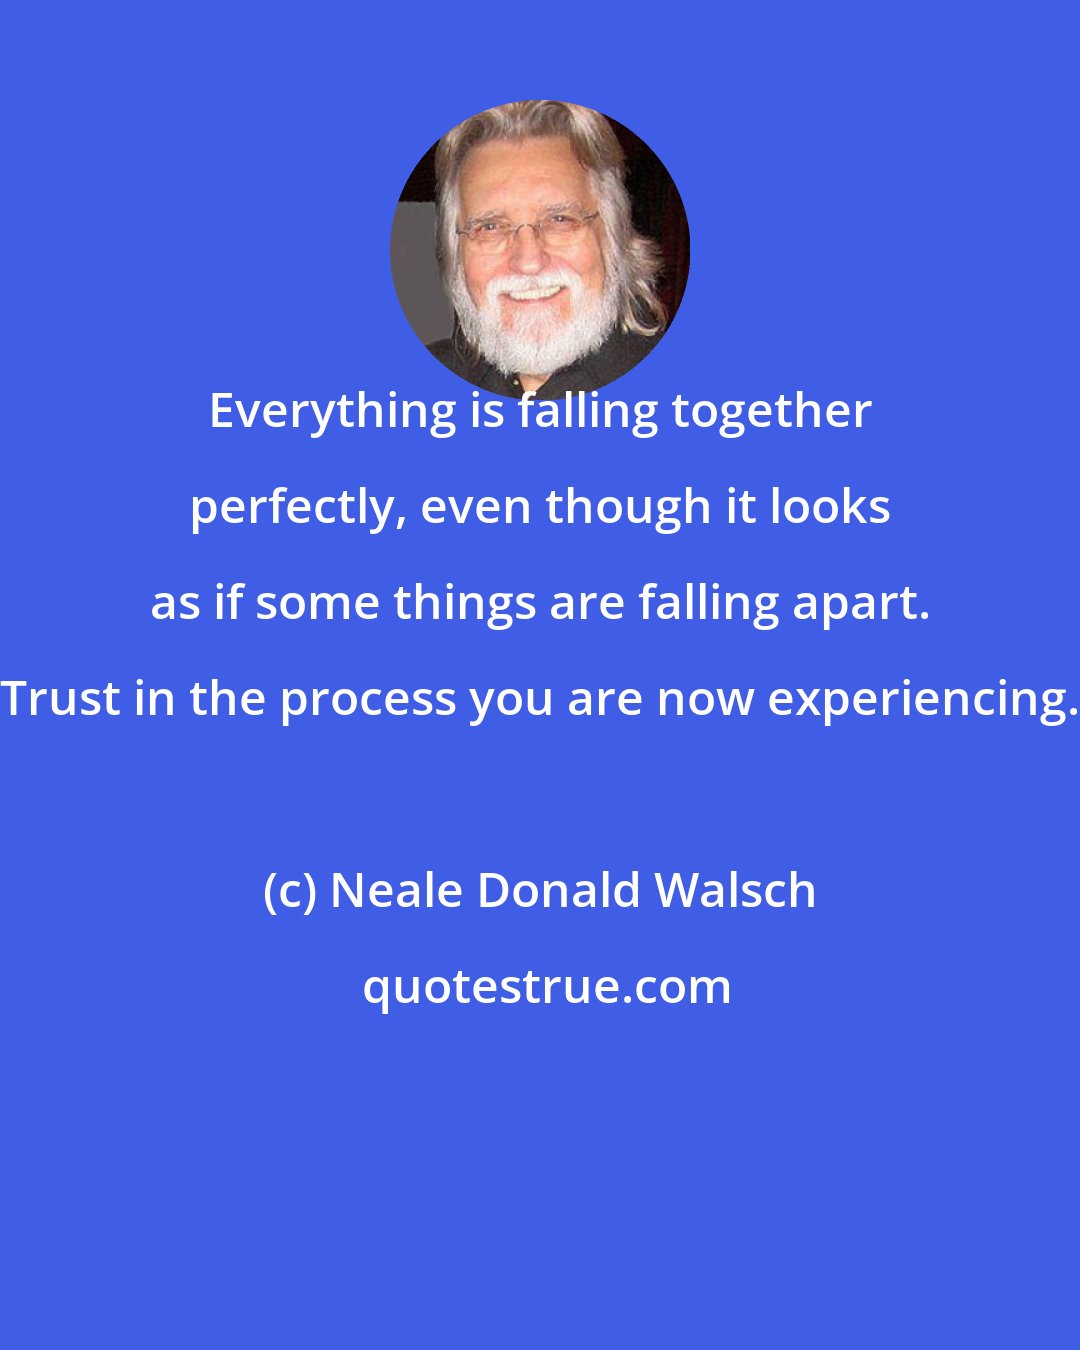 Neale Donald Walsch: Everything is falling together perfectly, even though it looks as if some things are falling apart. Trust in the process you are now experiencing.